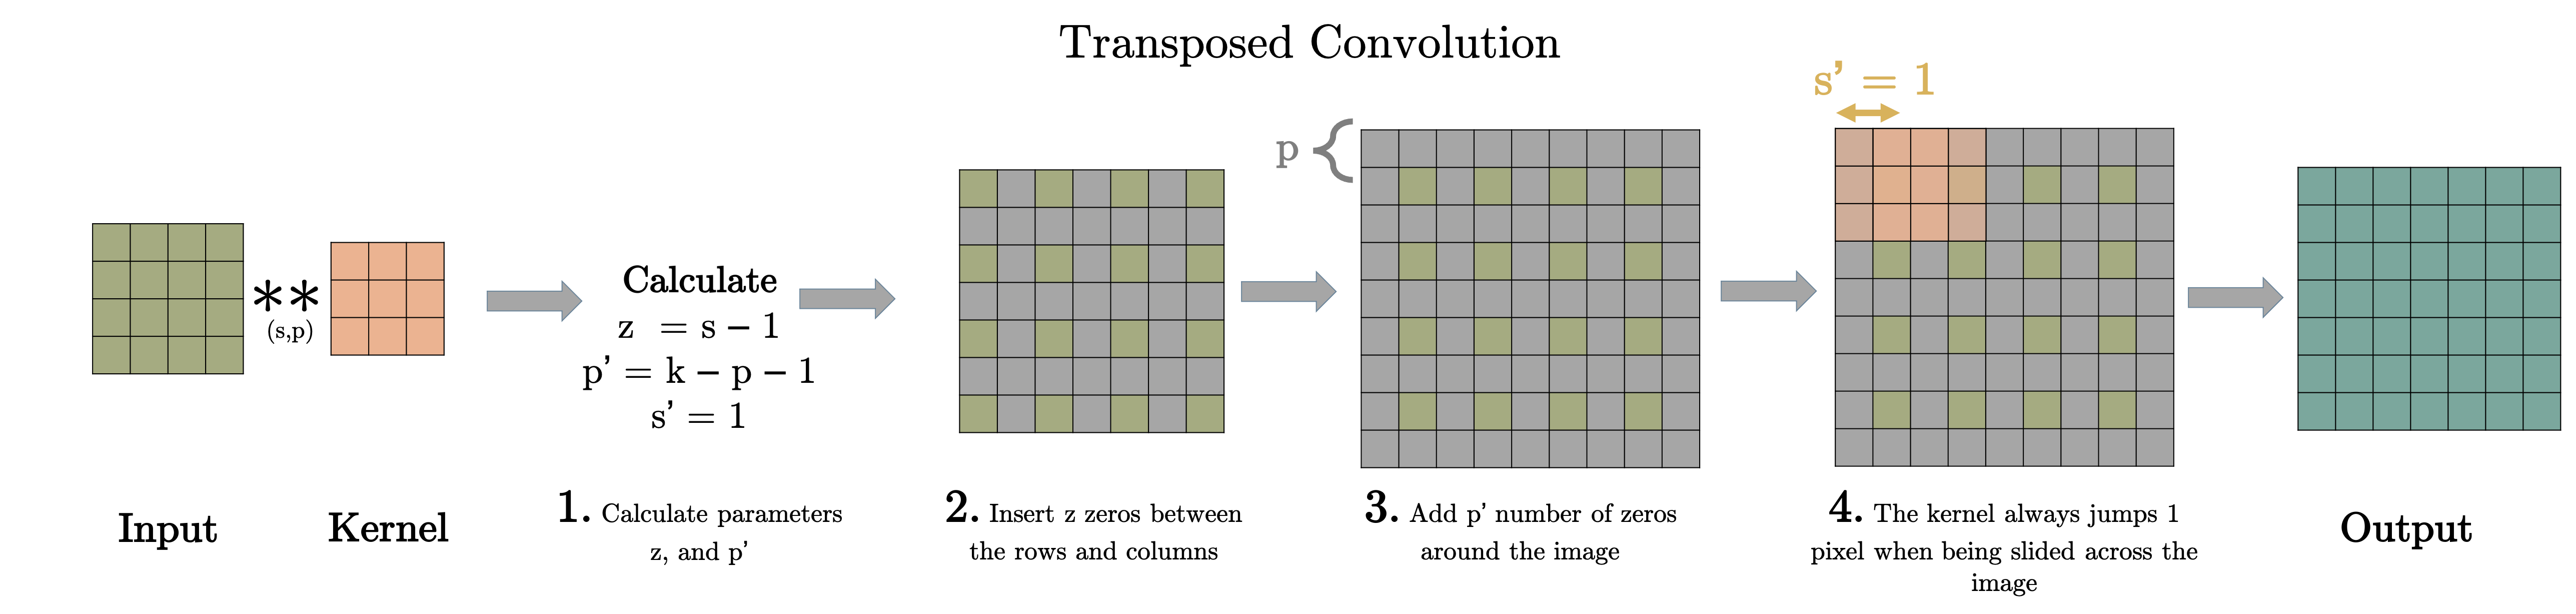 What is Transposed Convolutional Layer?, by Aqeel Anwar